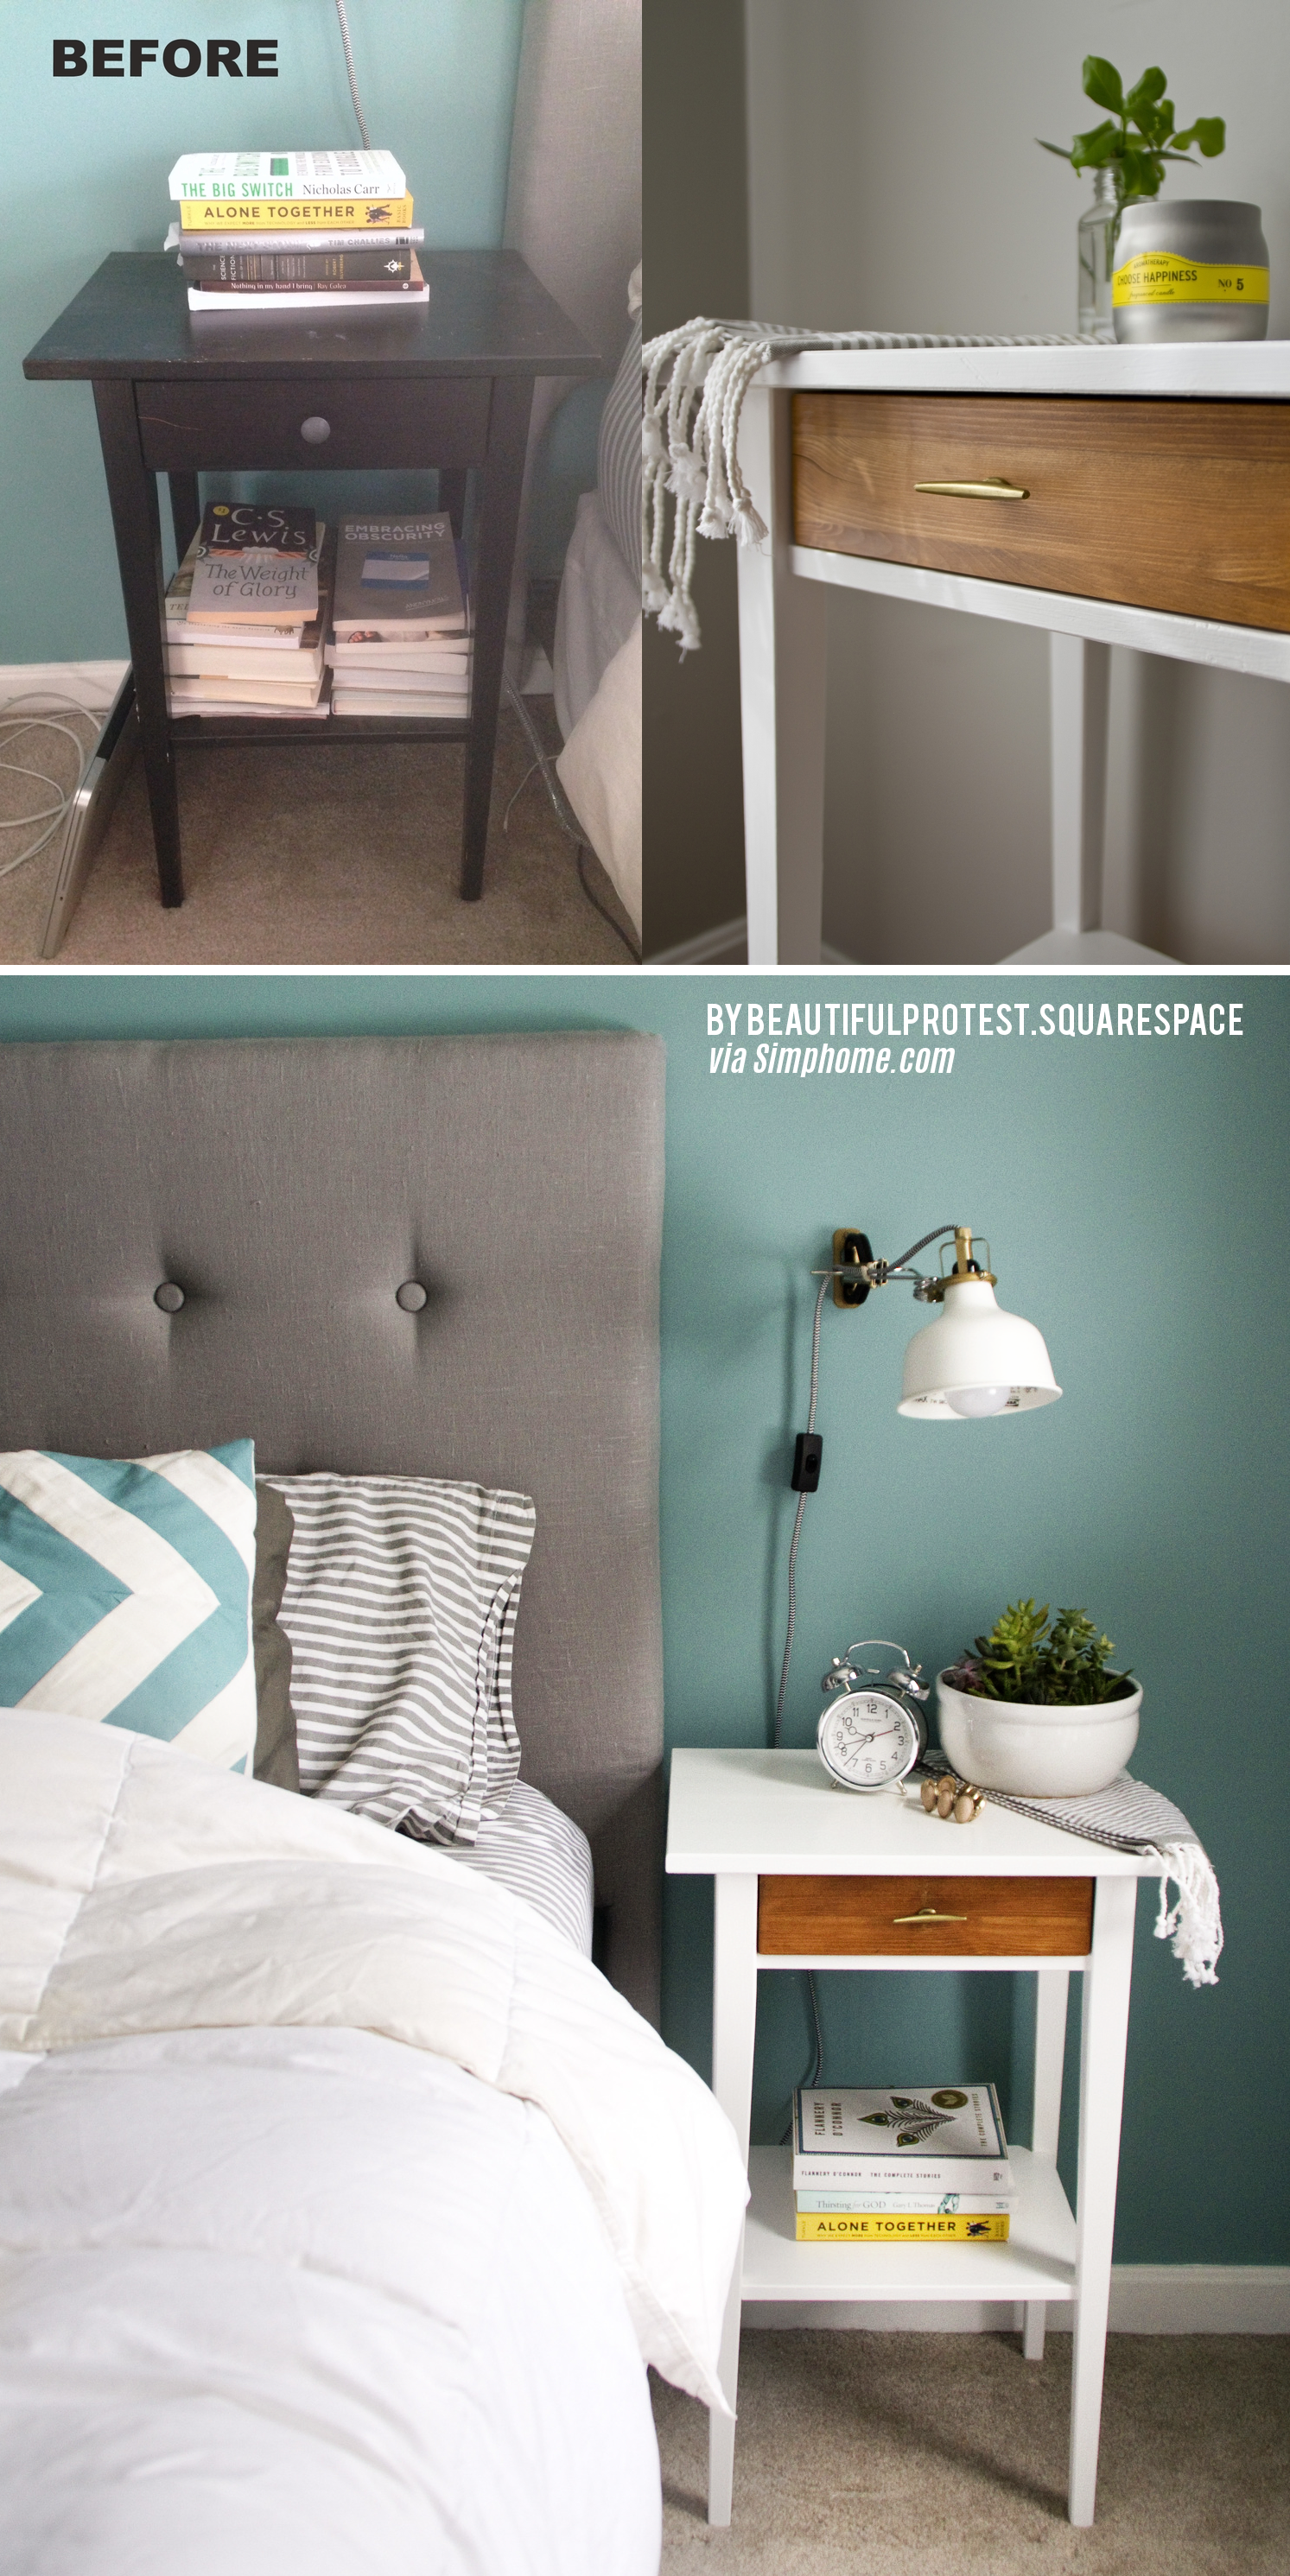 20 Nightstand remix by beautifulprotest via simphome